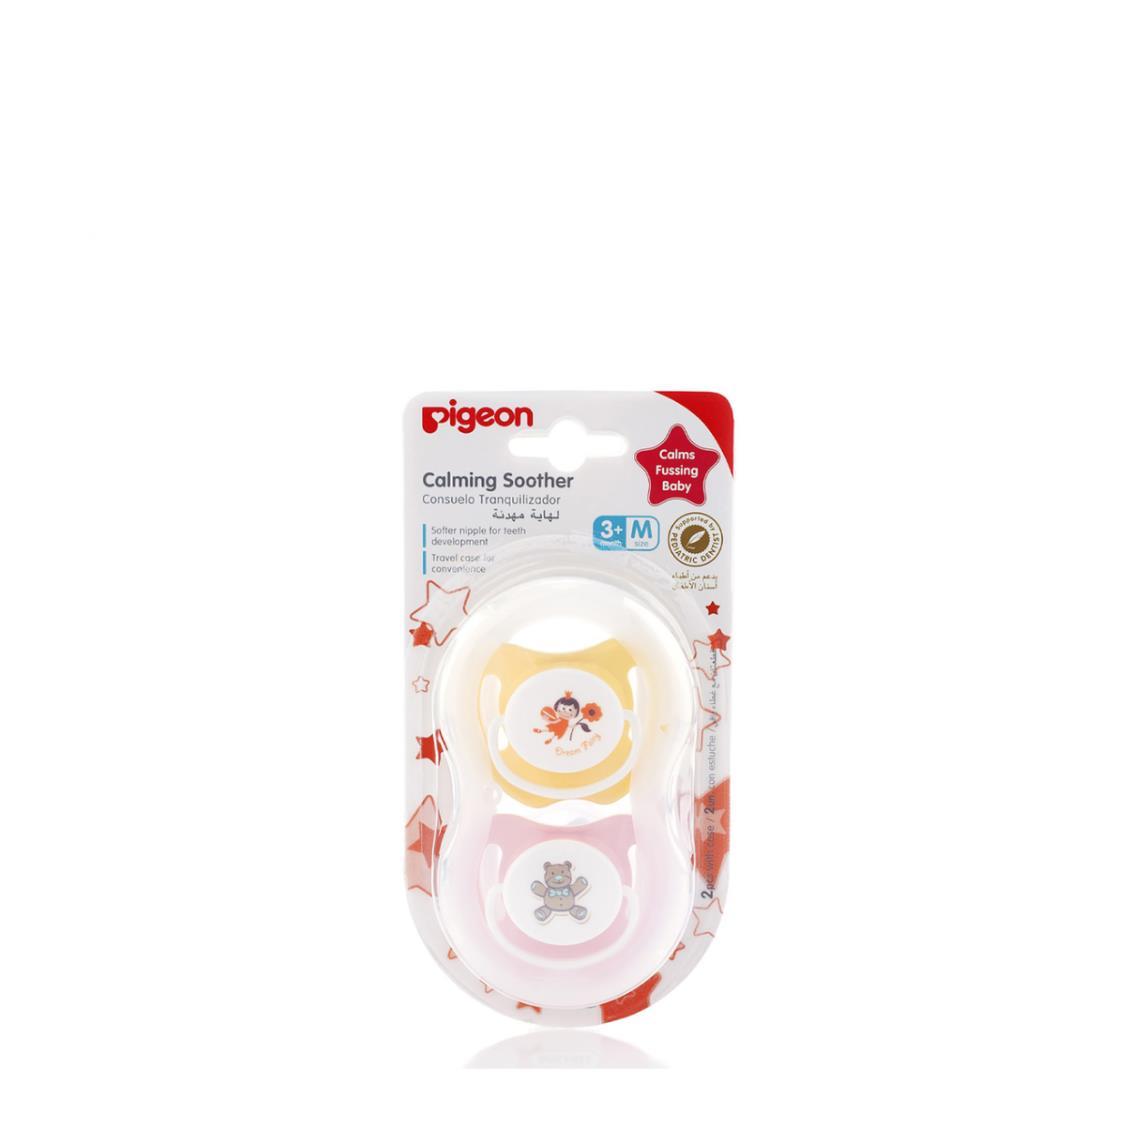 Pigeon Calming Soother 2pcs GirlM Blister